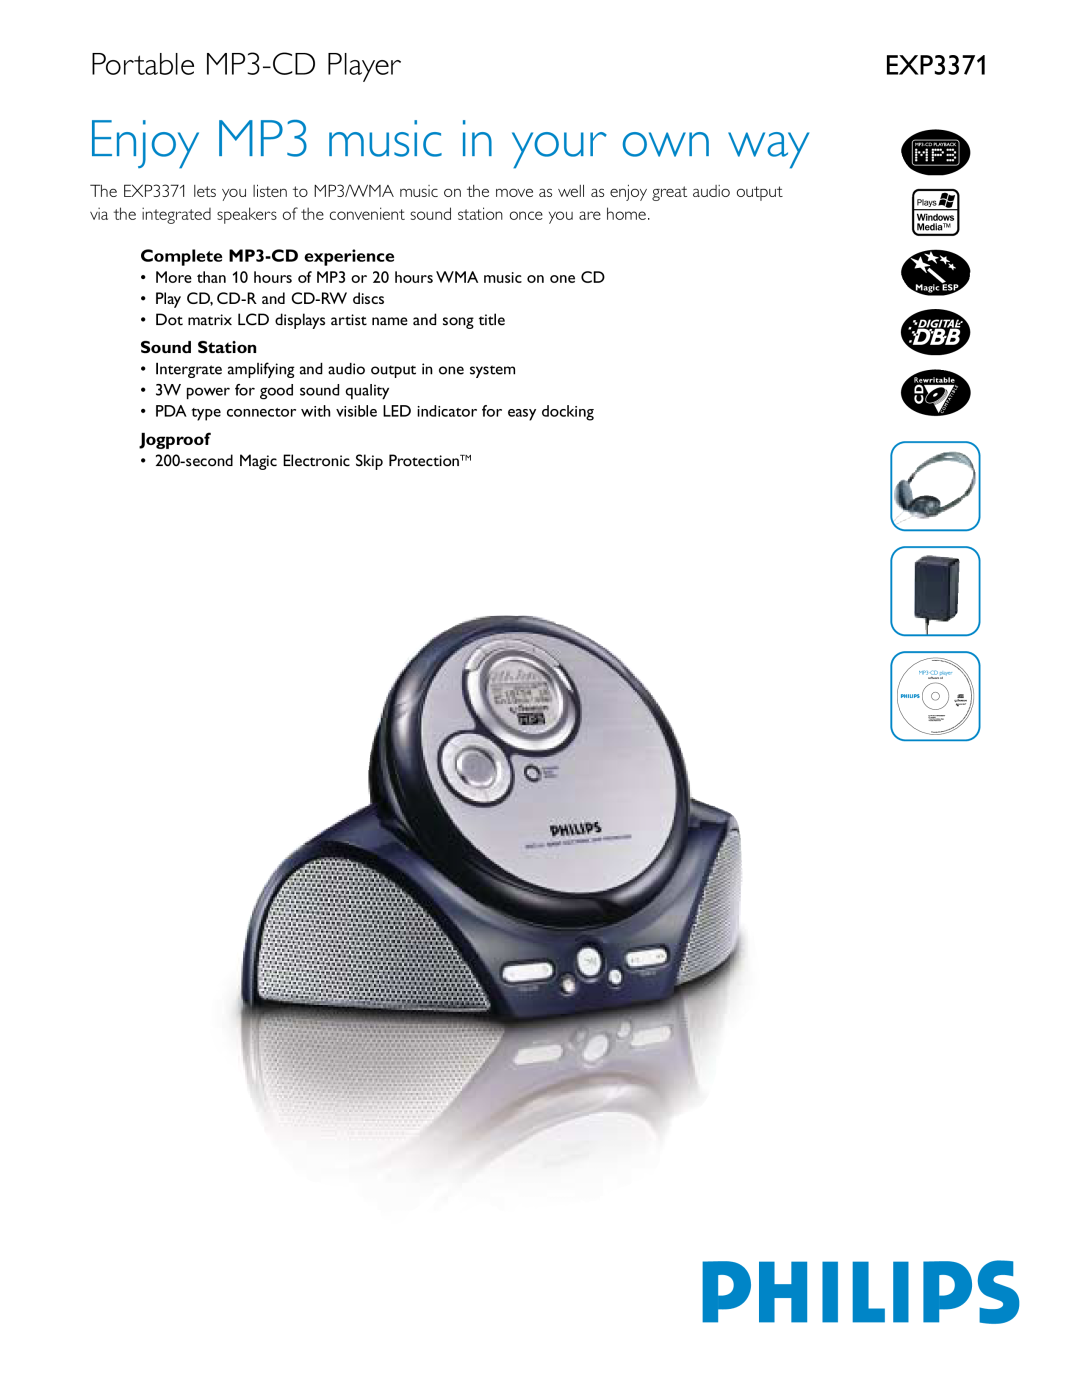 Philips EXP3371 manual Portable MP3-CD Player, Complete MP3-CD experience, Sound Station, Jogproof 